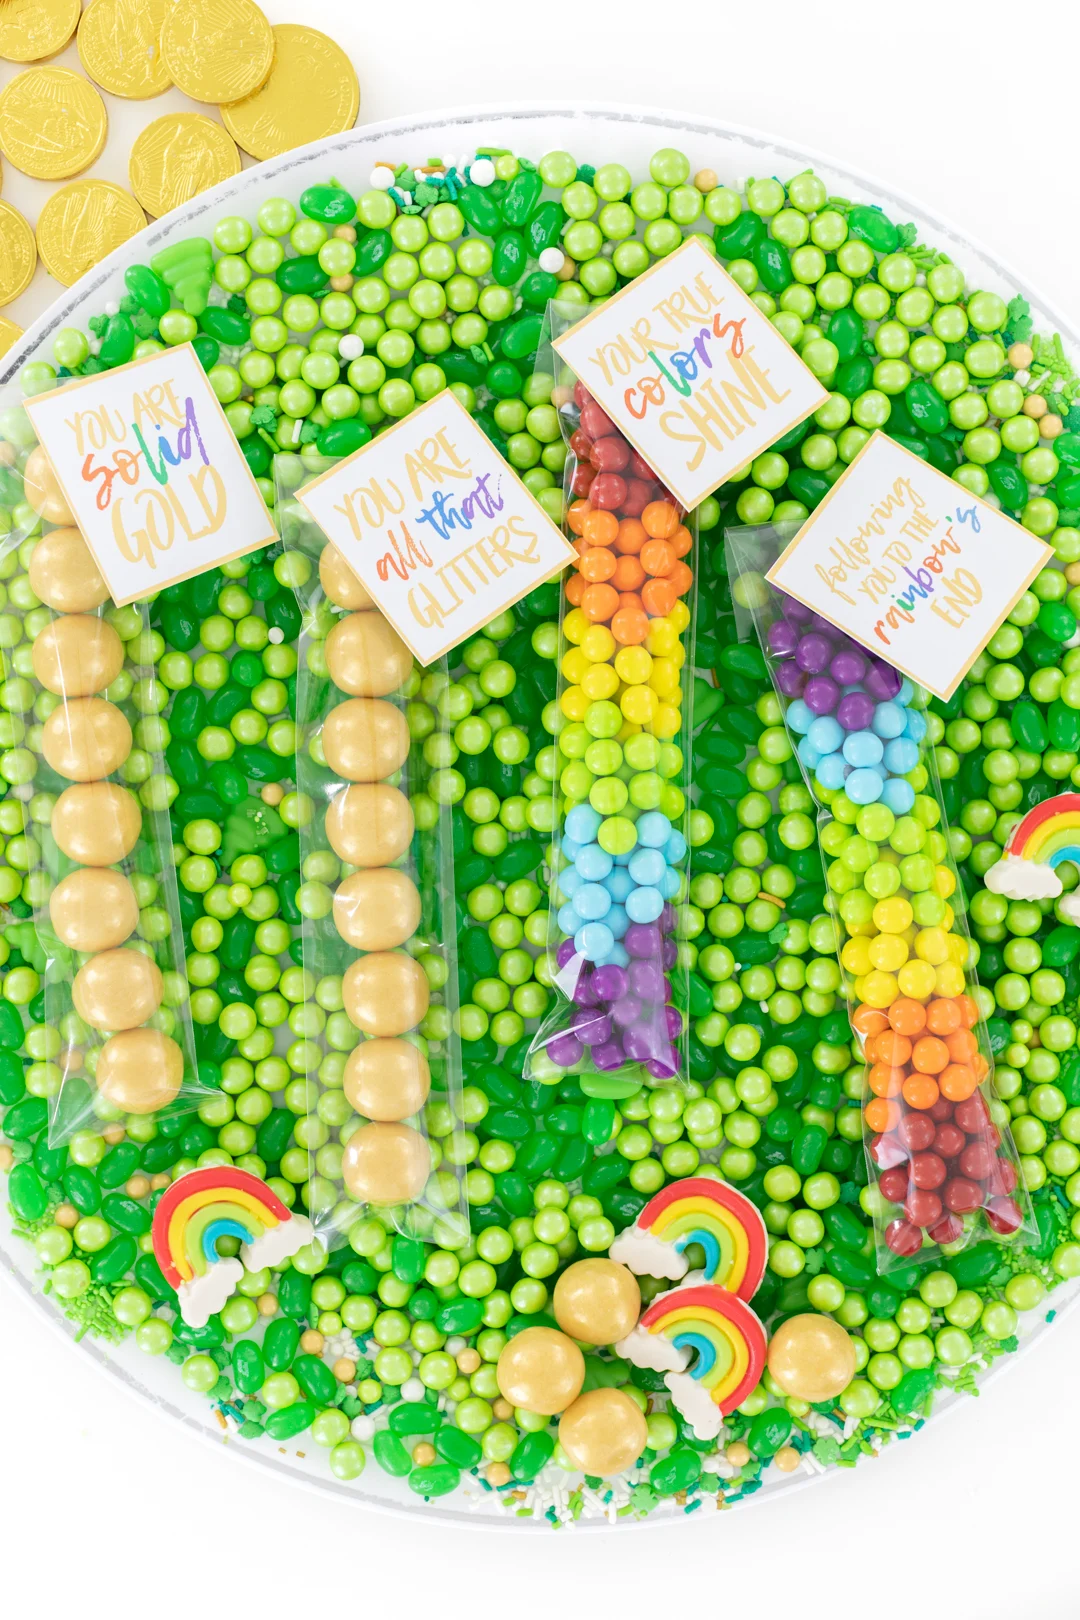 tray of st. patrick's day favors